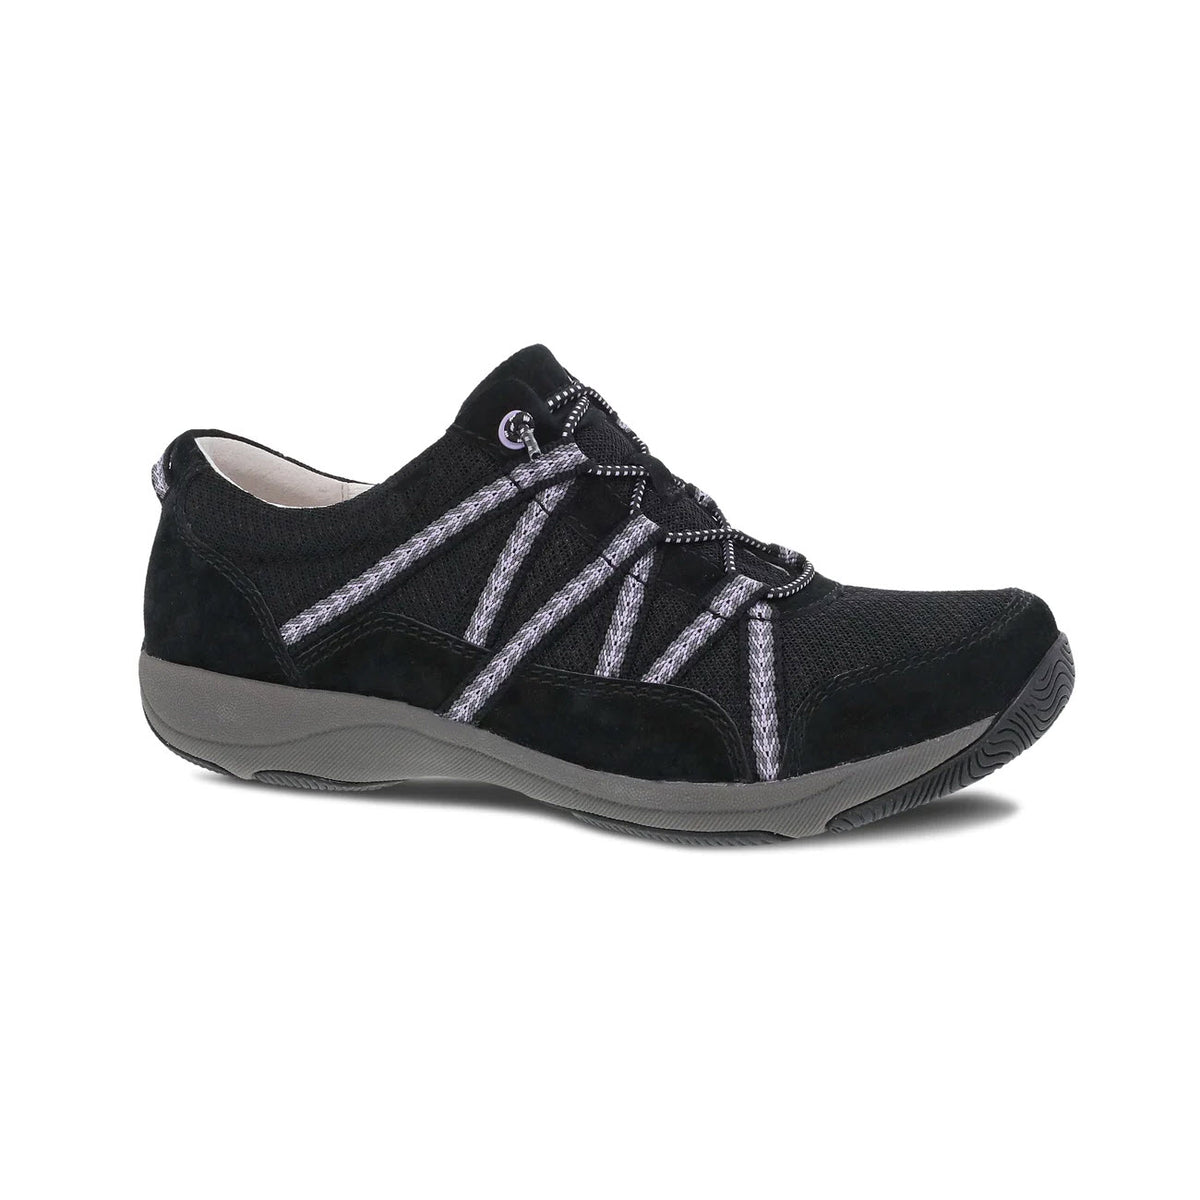 A single Dansko Harlyn Black women&#39;s casual sneaker with silver accents and premium support, displayed against a white background.